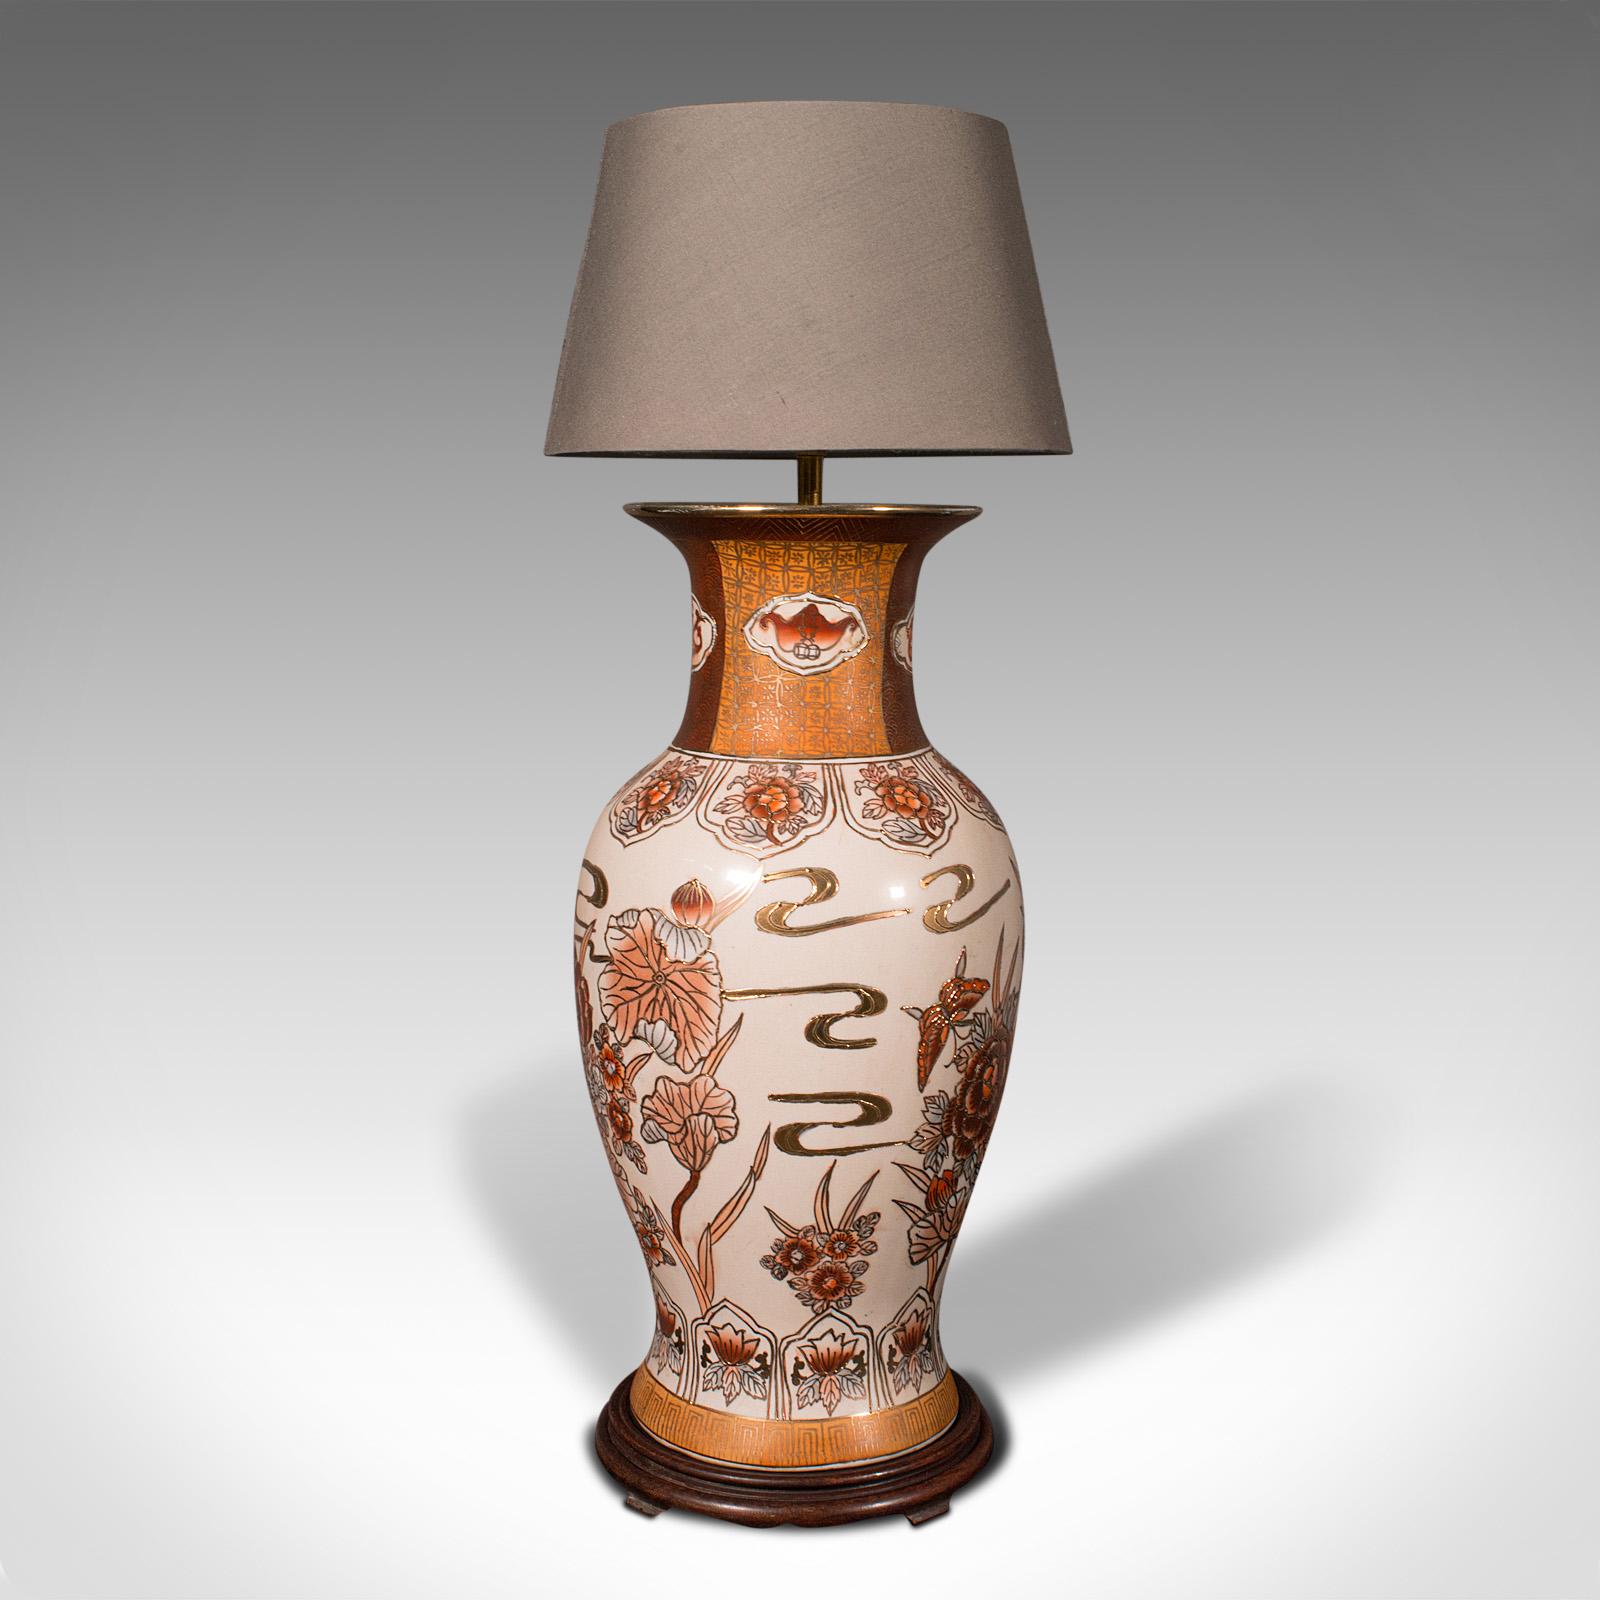 20th Century Pair of Vintage Table Lamps, Chinese, Ceramic, Decorative Light, Art Deco, 1940 For Sale